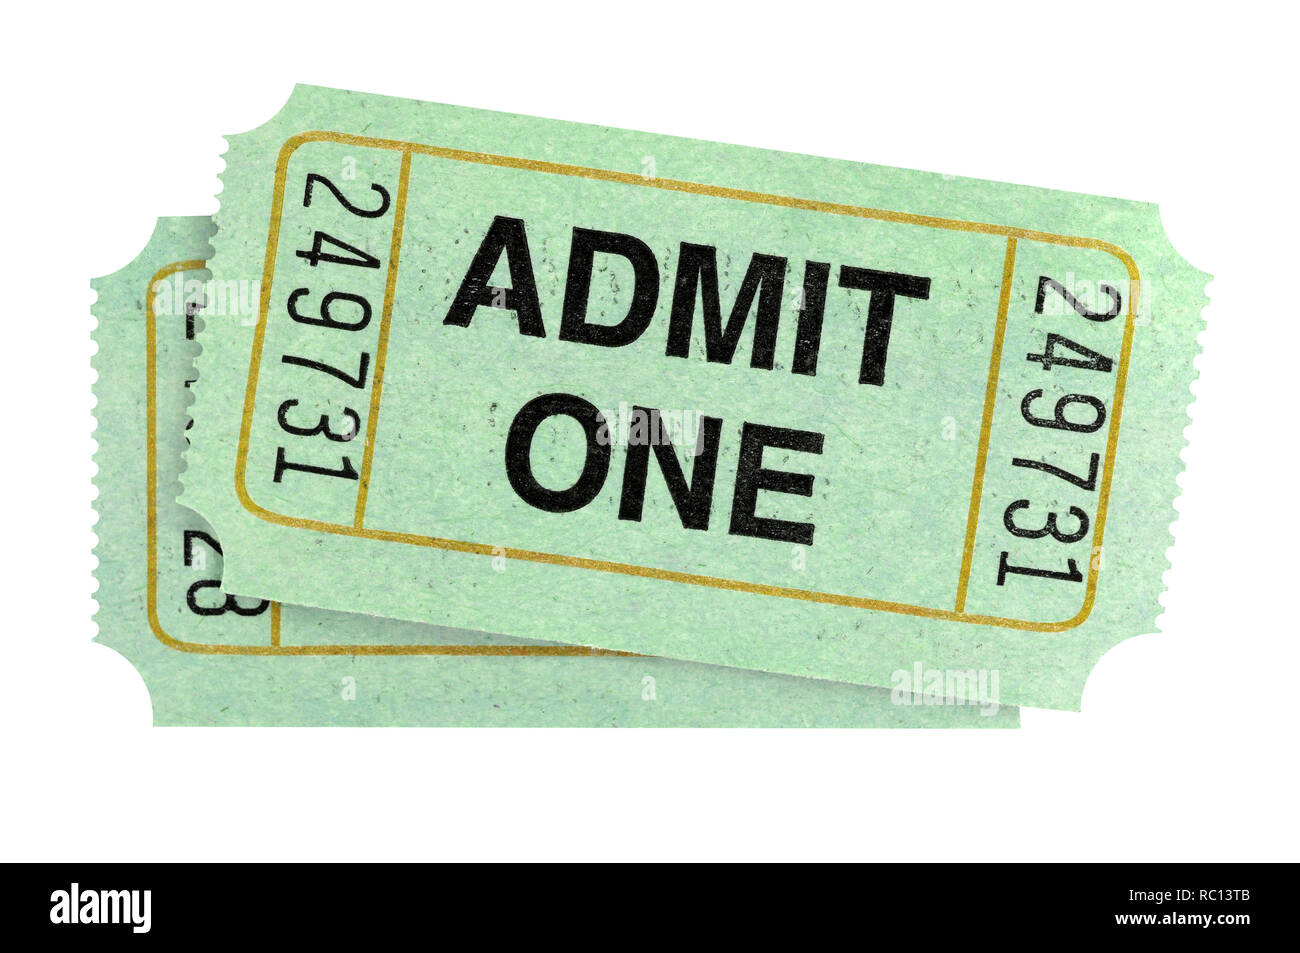 Pair of admit one tickets isolated on white background Stock Photo